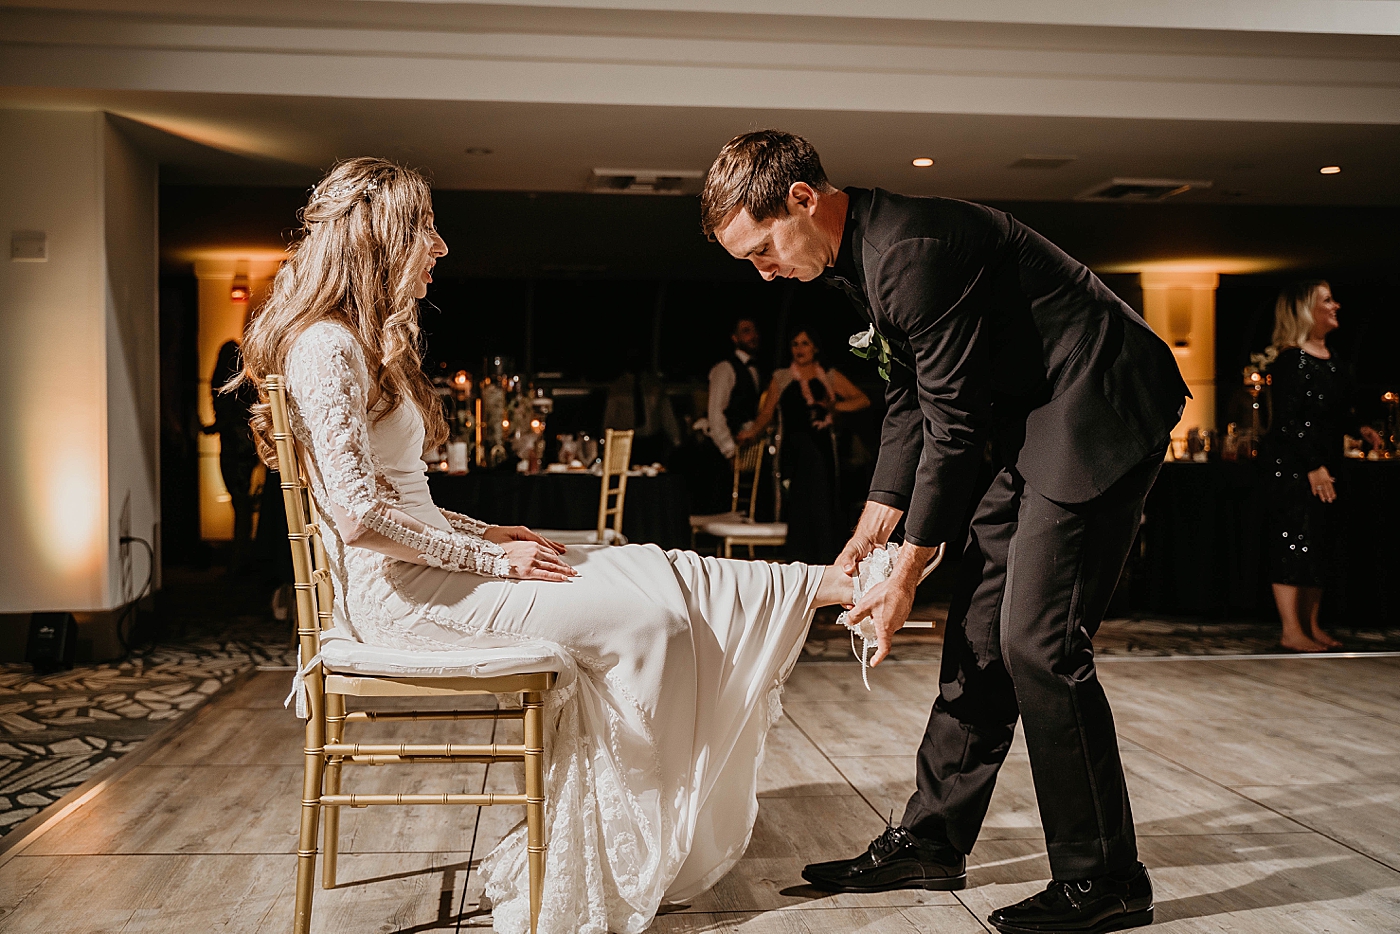 Groom getting the garter Waterstone Resort and Marina Wedding captured by South Florida Wedding Photographer Krystal Capone Photography